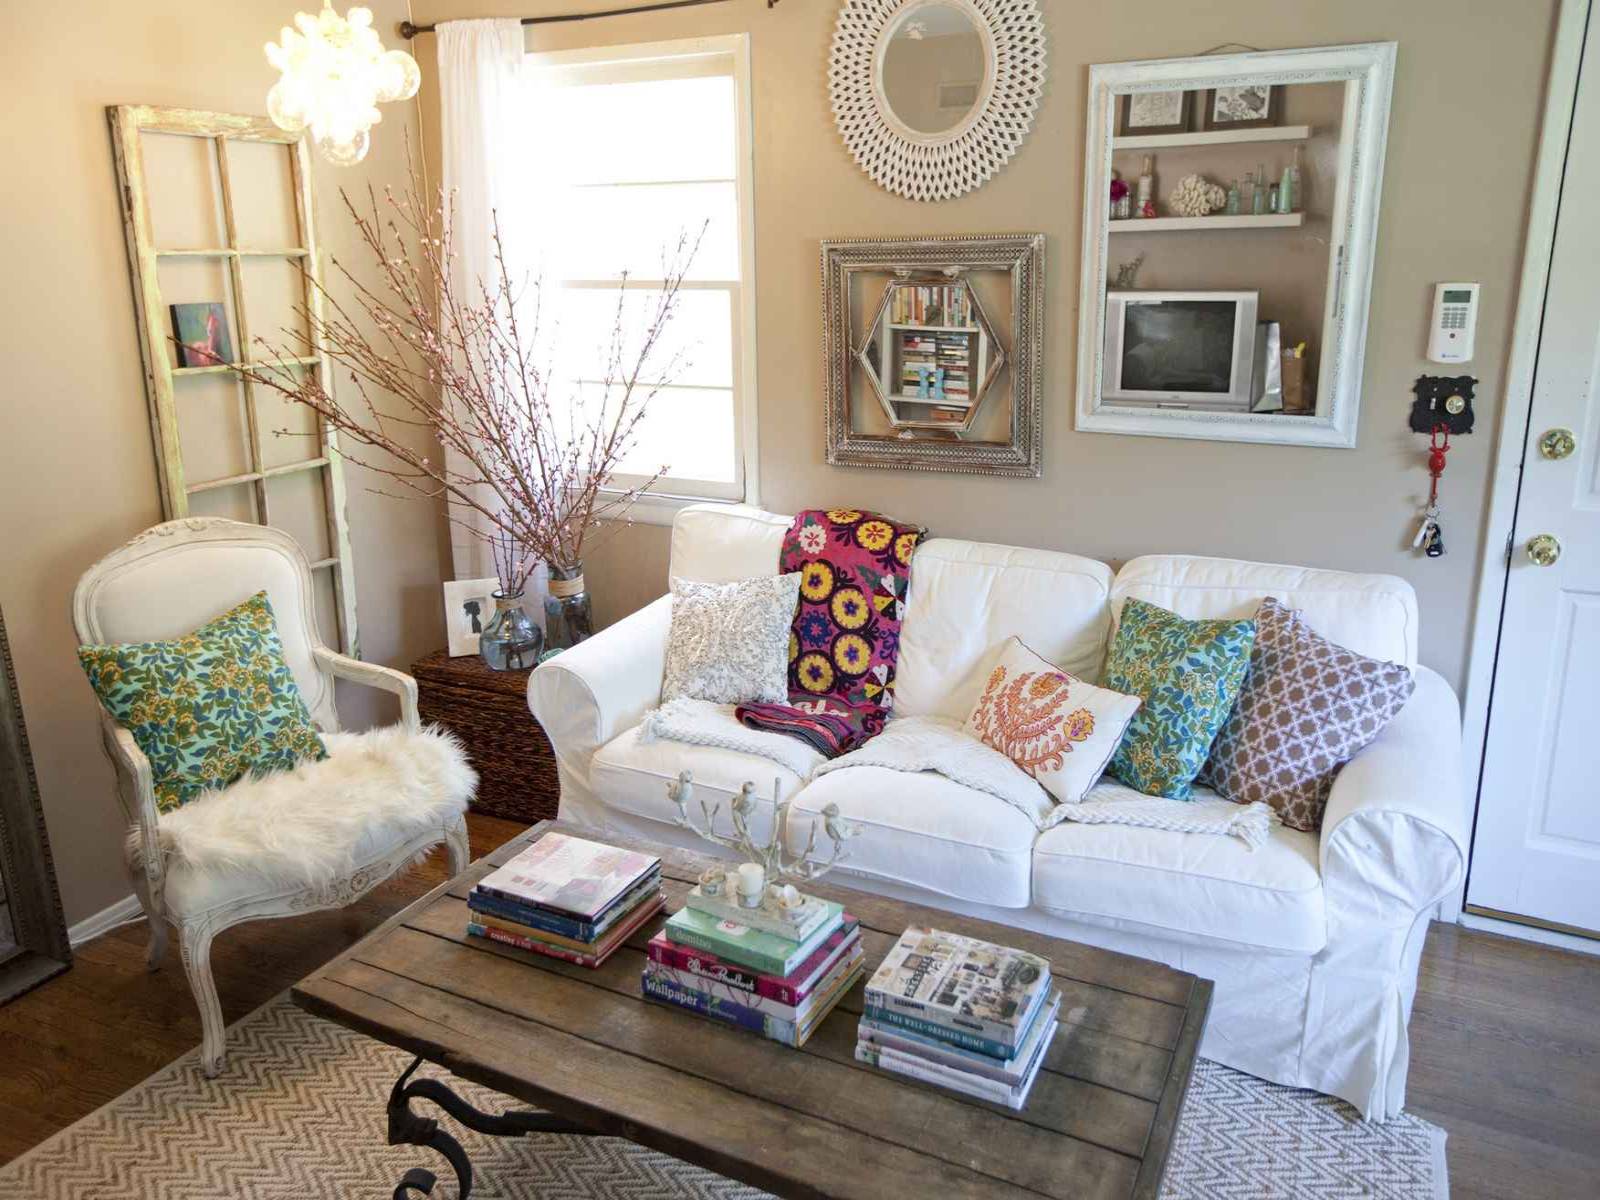 How to Accessorize a Living Room on a Budget